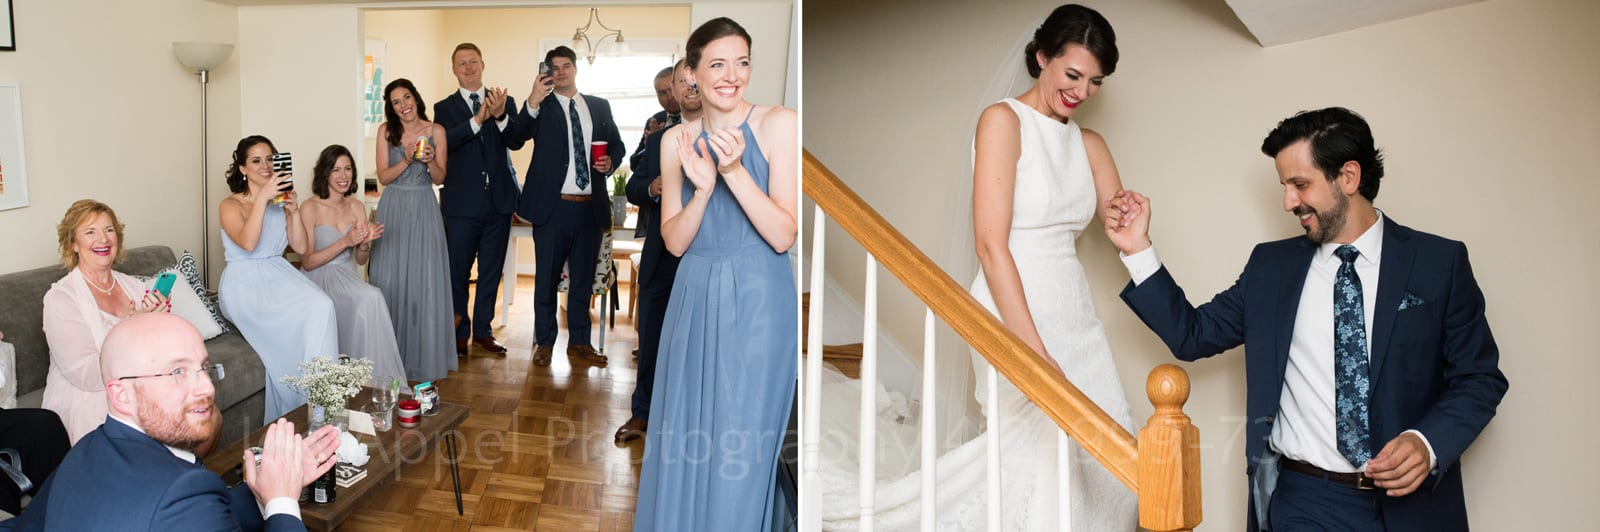 A group of groomsmen and bridesmaids applaud as a bride and groom walk down a set of stairs into the room where they're gathered before a St Francis Hall Washington DC wedding.